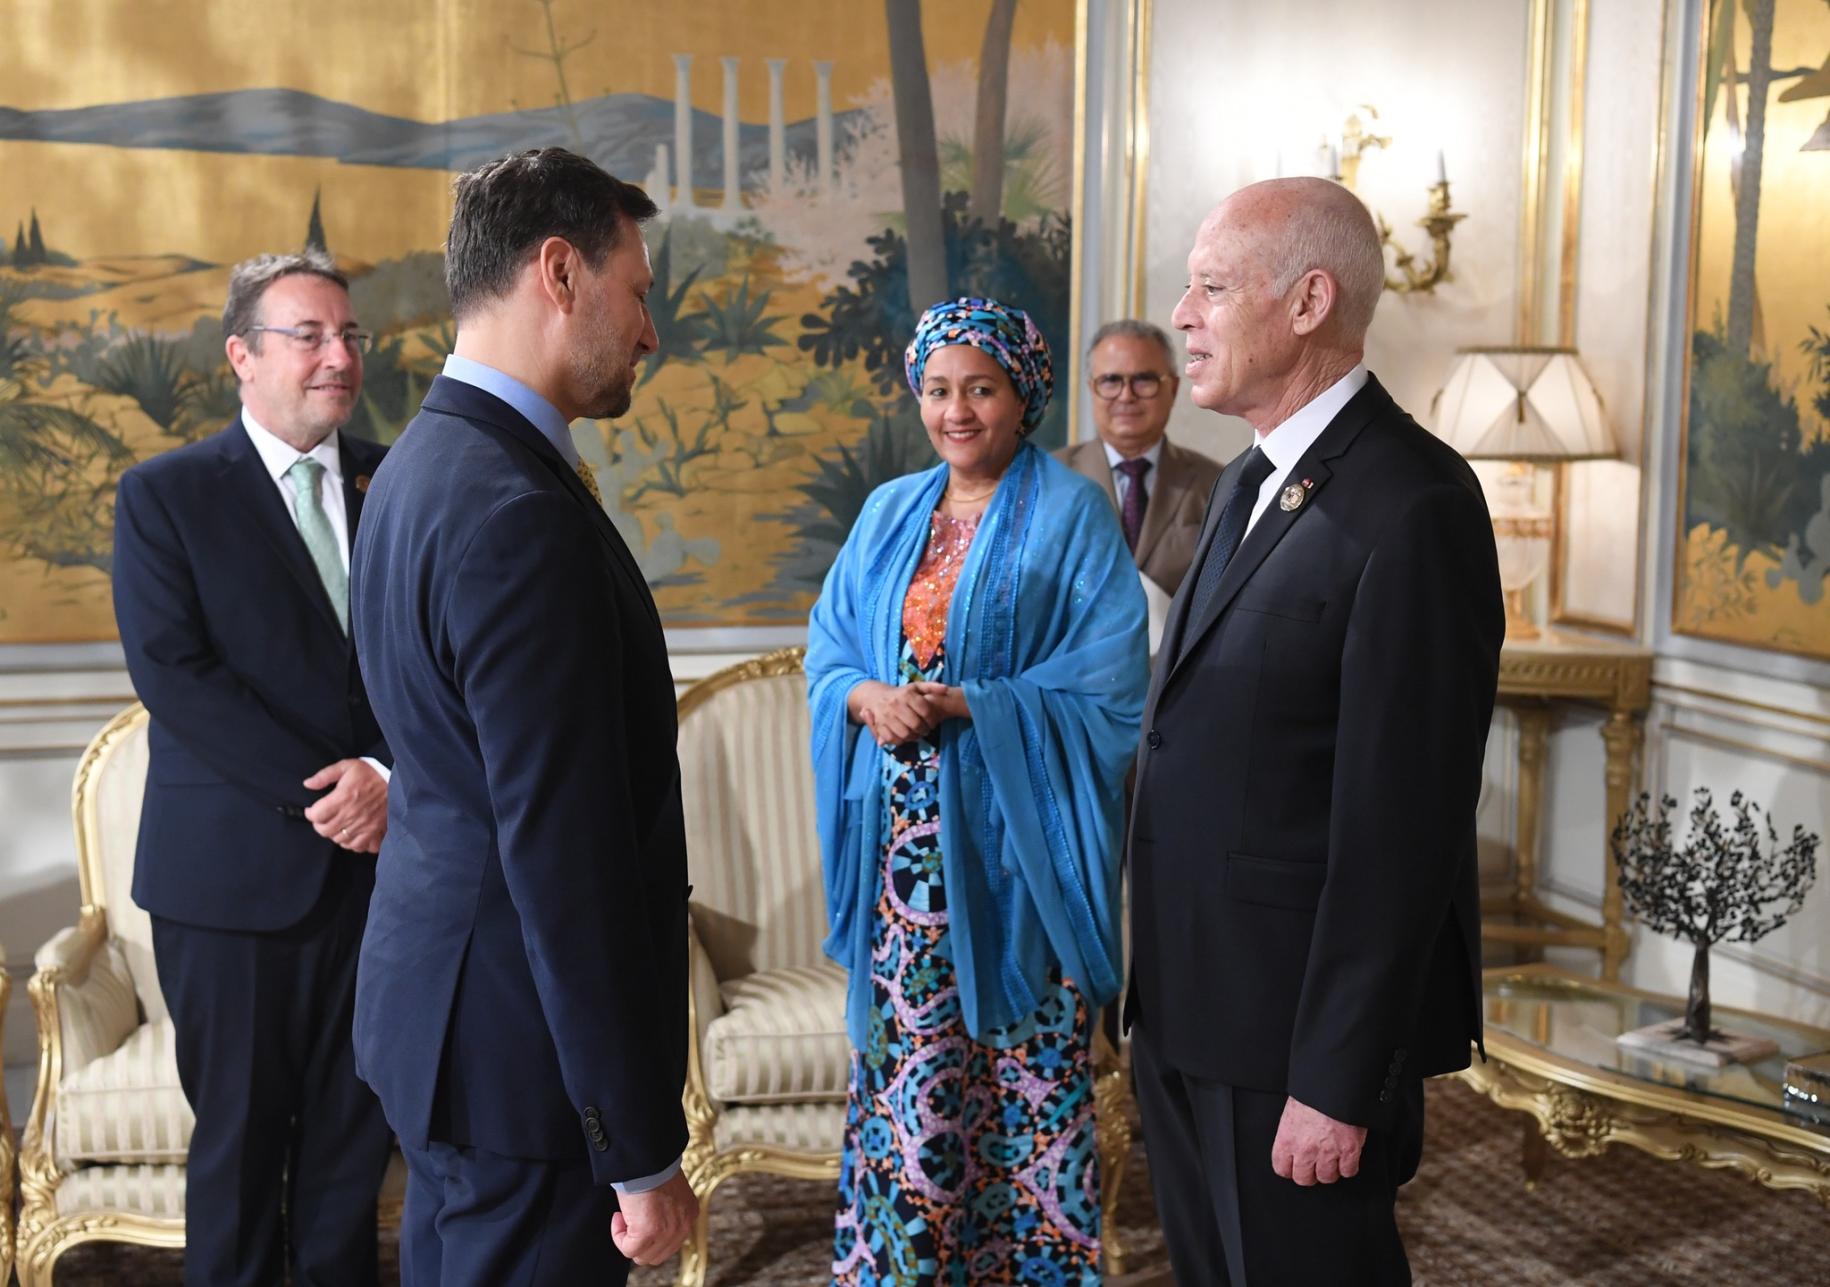 The United Nations Deputy Secretary-General Amina J. Mohammed, alongside UNDP Administrator Achim Steiner met with President of Tunisia Kais Saied on the margins of the eighth edition of the Tokyo International Conference on African Development (TICAD 8) held in Tunis, Tunisia, on 27 and 28 August 2022.